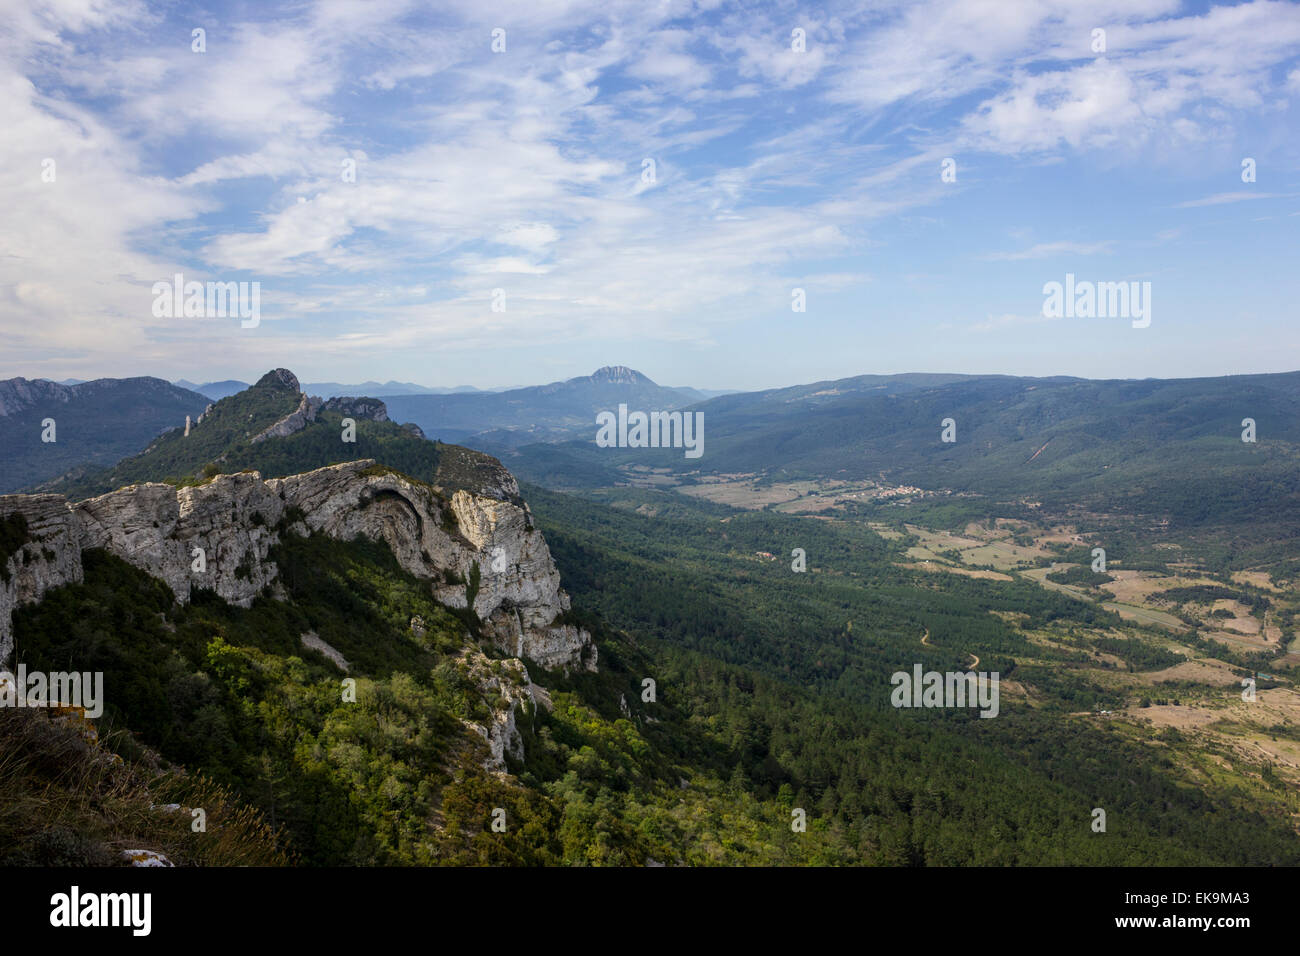 The Pech de Bugarach, seen on the horizon from the Chateau de Peyrepertuse, Pyrenees, Southern France Stock Photo